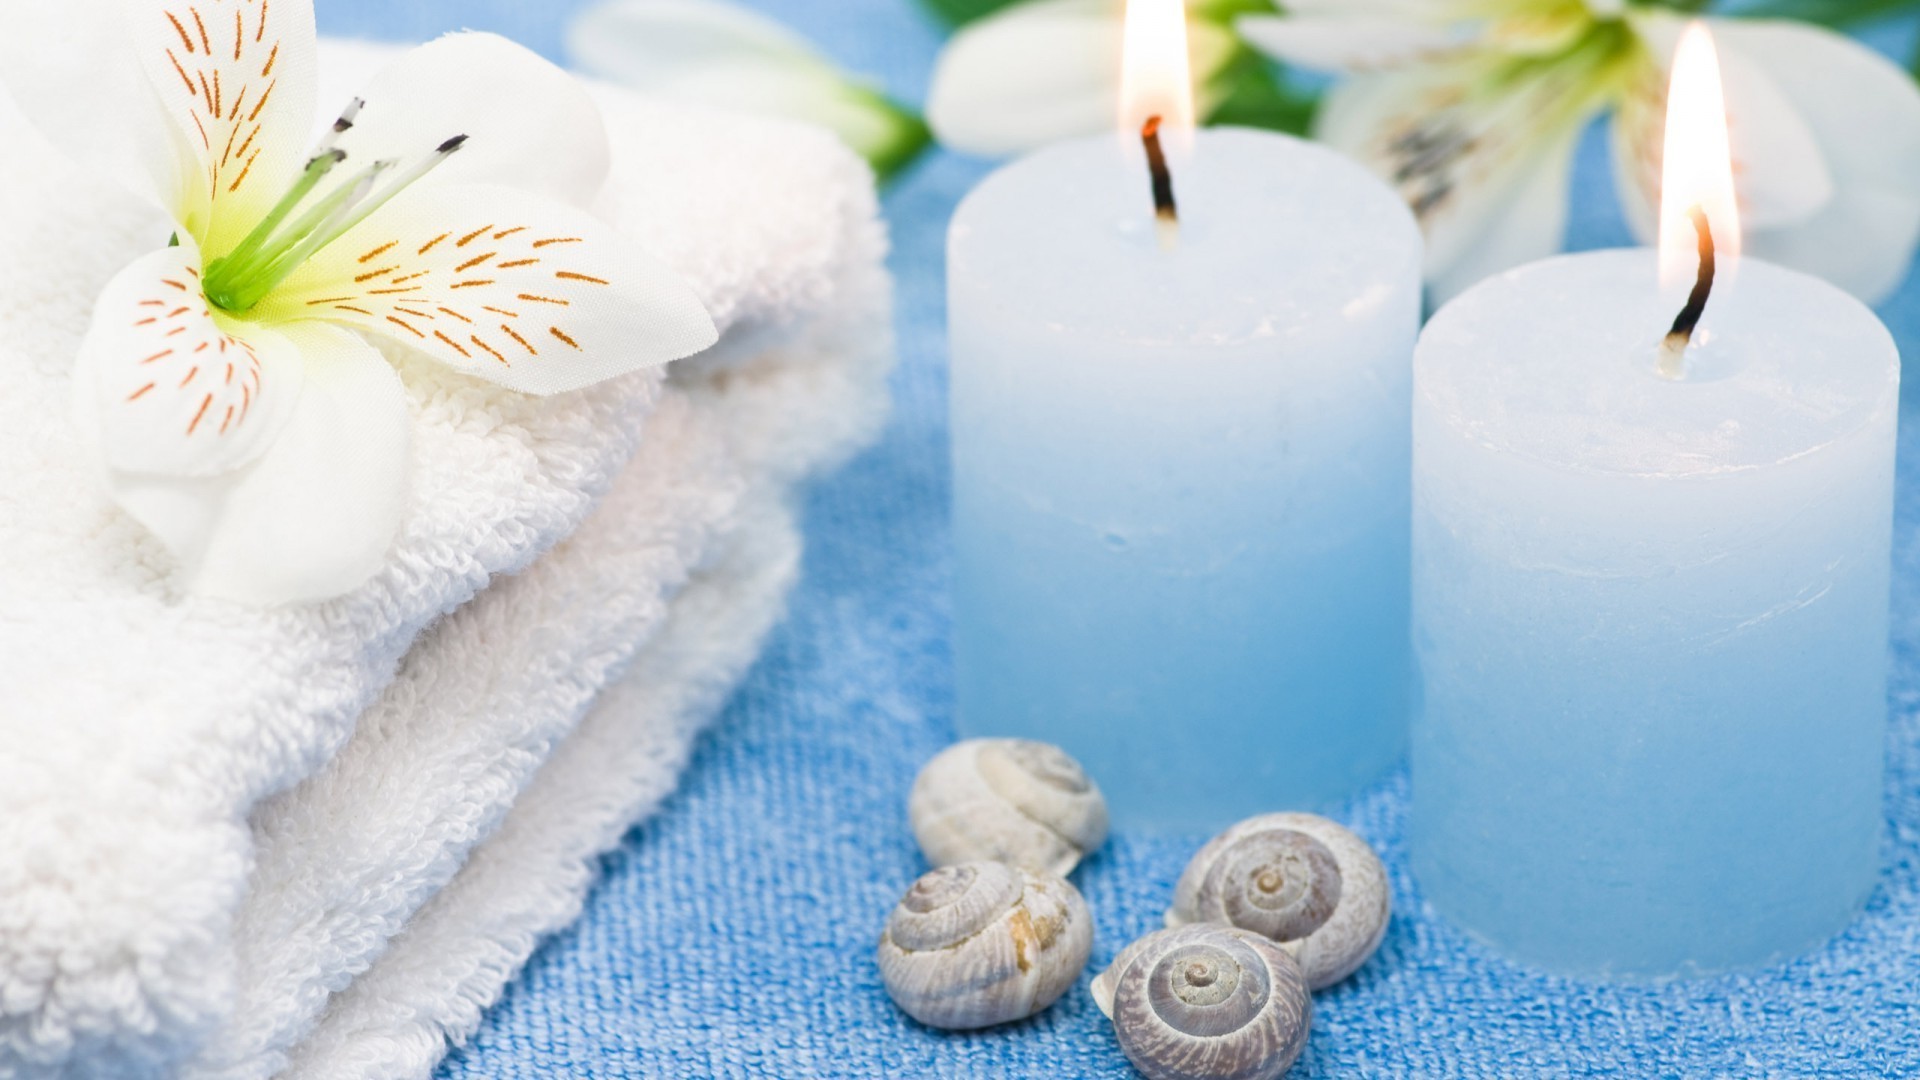 contrasts bath relaxation treatment aromatherapy therapy hygiene zen candle towel purity harmony massage bathroom soap clean nature flower care composure